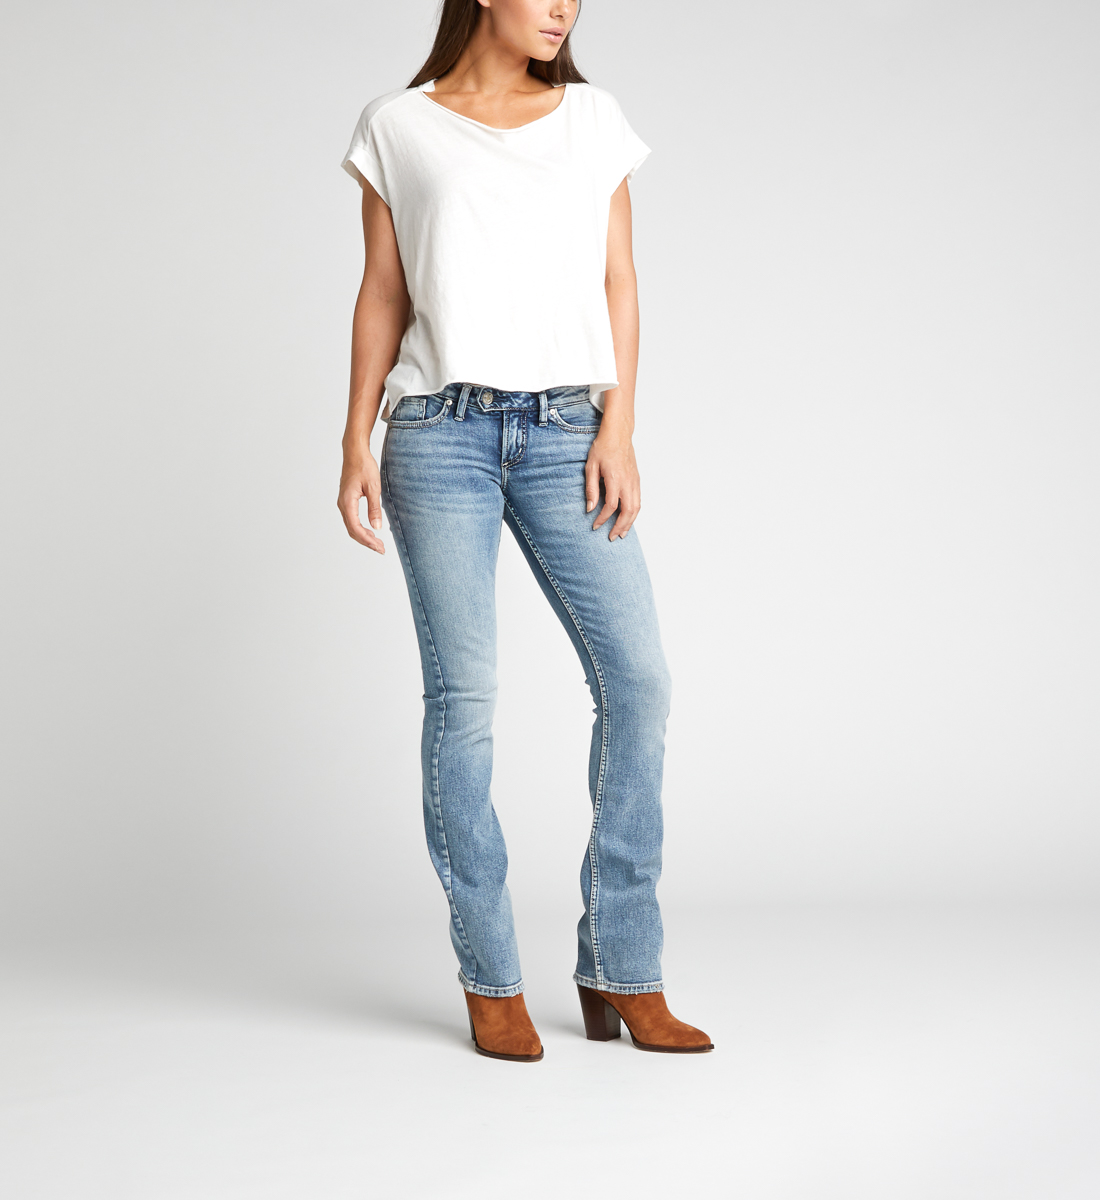 low rise slim fit jeans womens